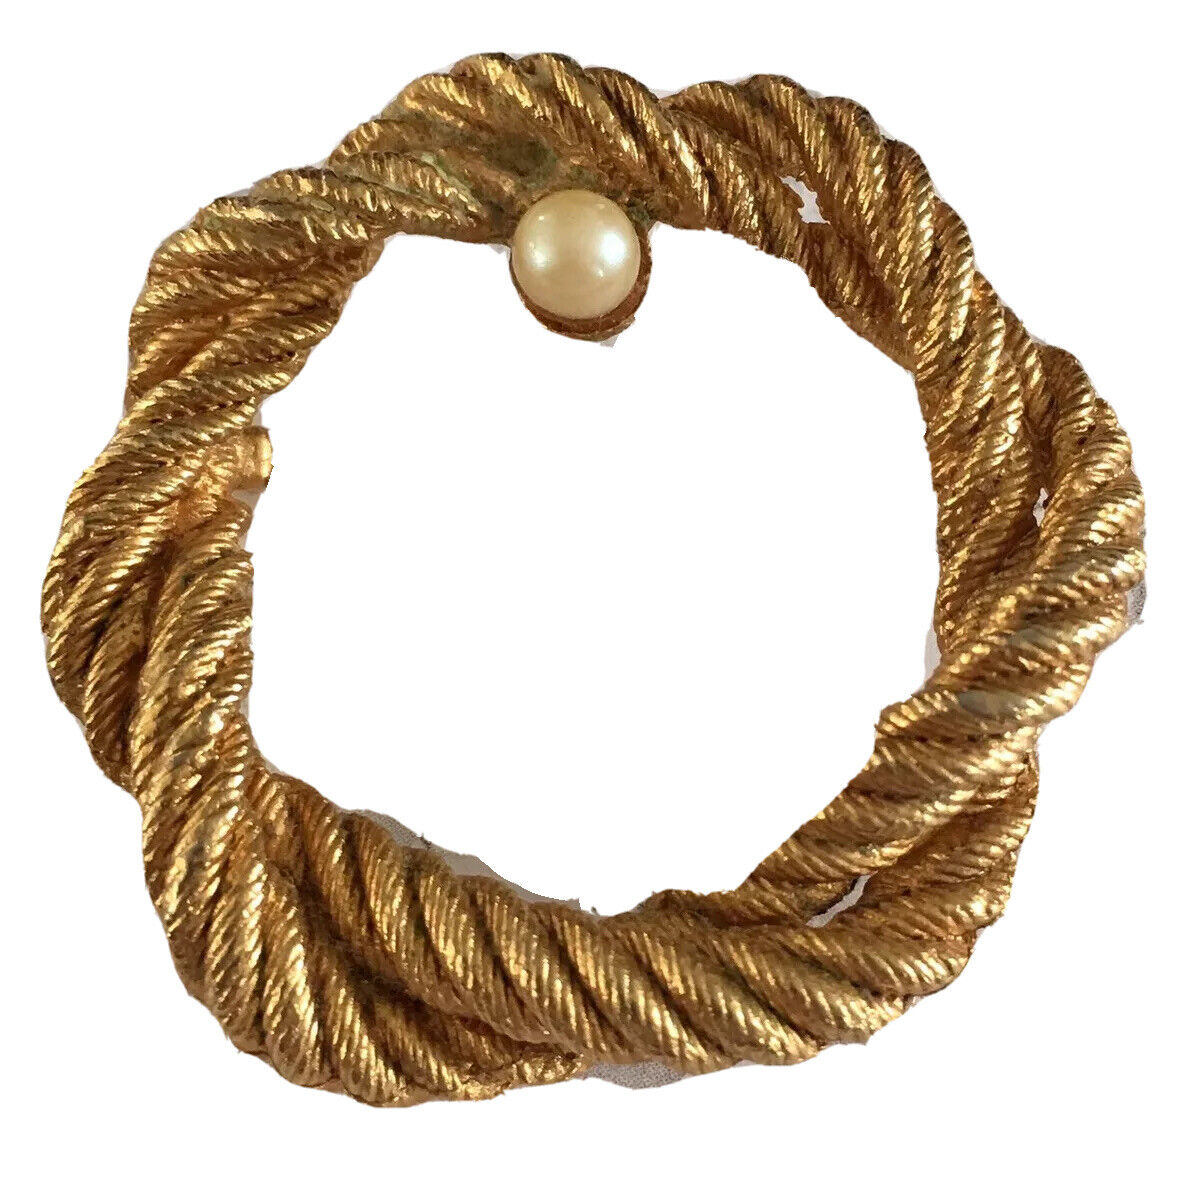 Vintage Wreath Pin Brooch Rope Gold Tone Faux Pearl Lapel Pin Infinity Circle